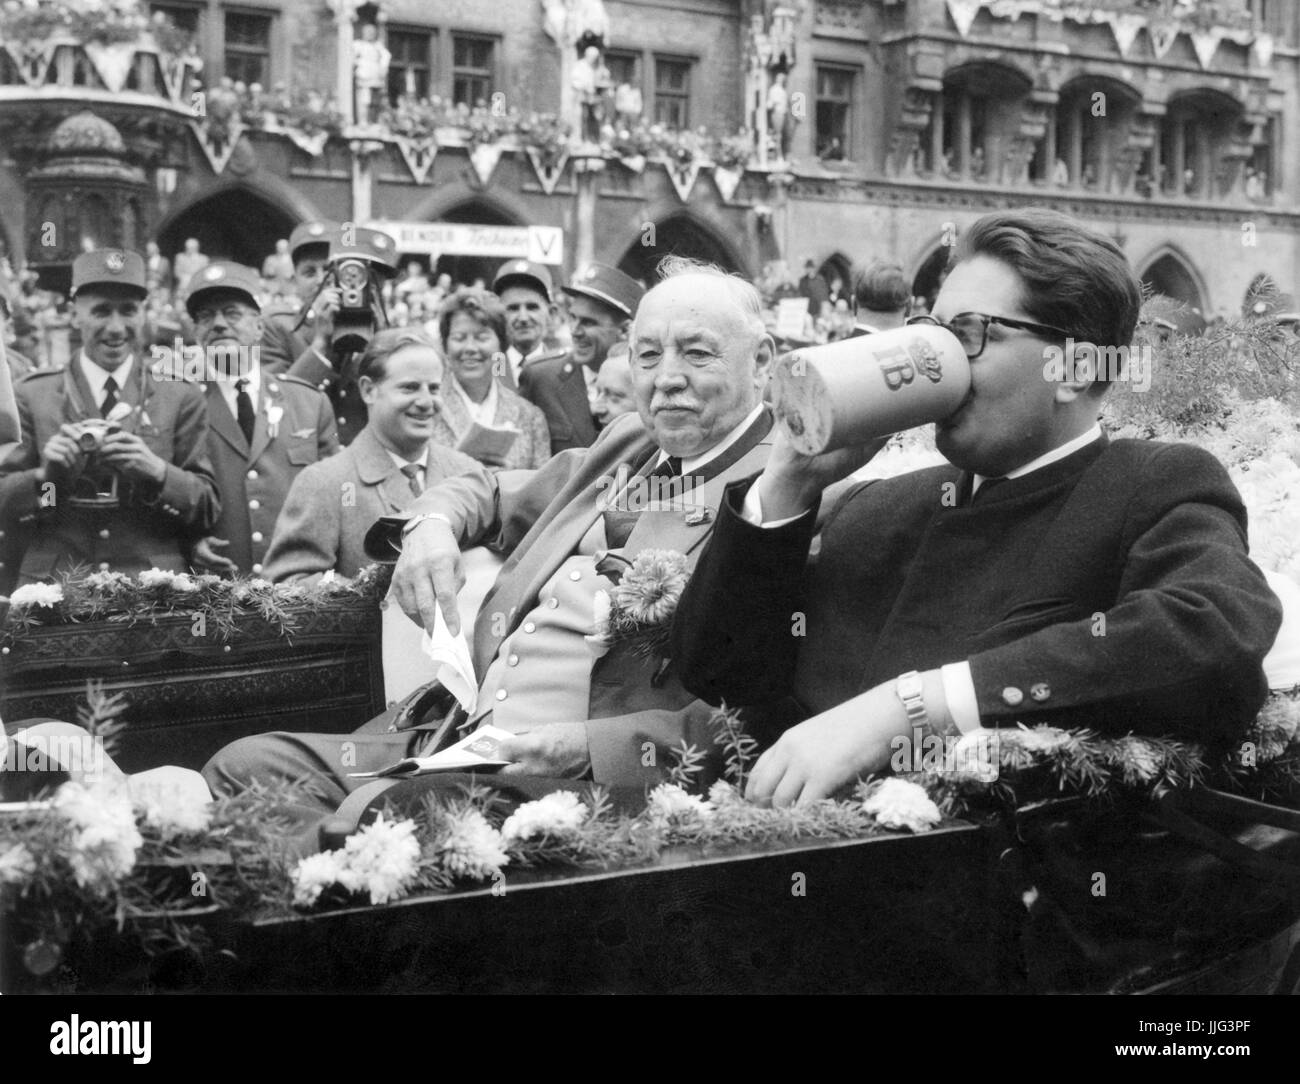 The new mayor of Munich, Hans-Jochen Vogel (r), refreshes himself with a sip of beer during the traditional parade at the Oktoberfest 1960.  Foto: Georg Göbel +++(c) dpa - Report+++ | usage worldwide Stock Photo